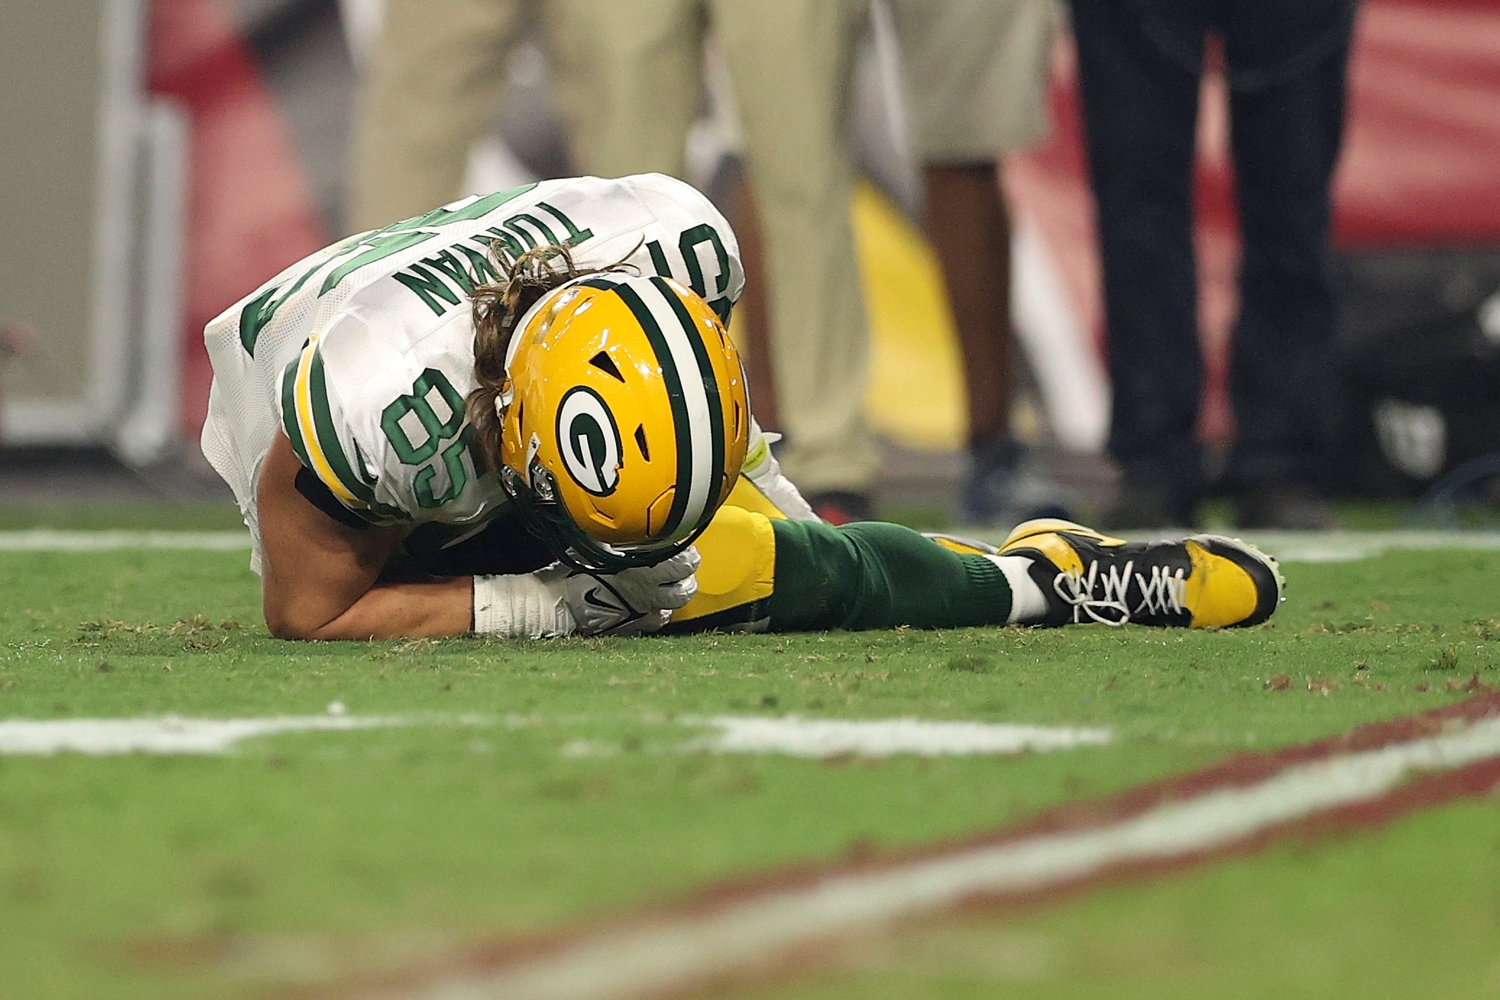 Green Bay Packers tight end Robert Tonyan stays down on the field after suffering an injury.